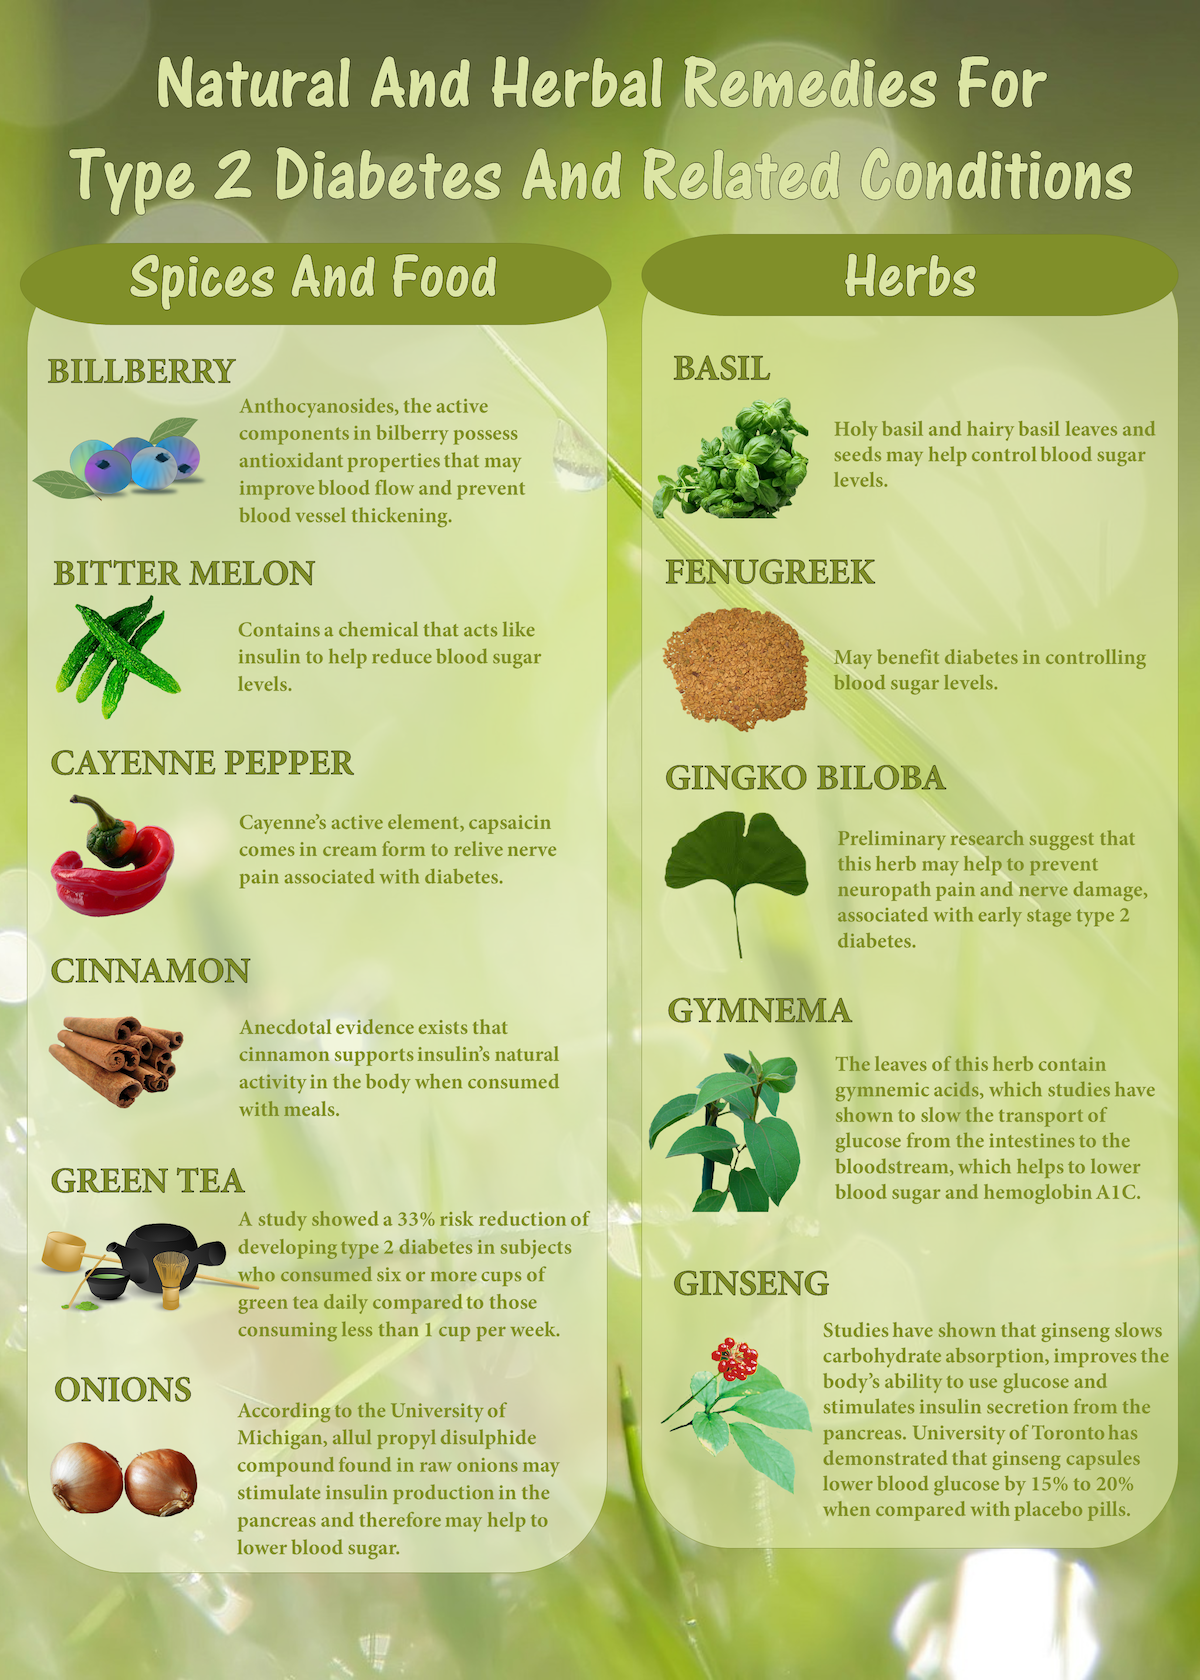 Natural Remedies for Type 2 Diabetes (Infographic)